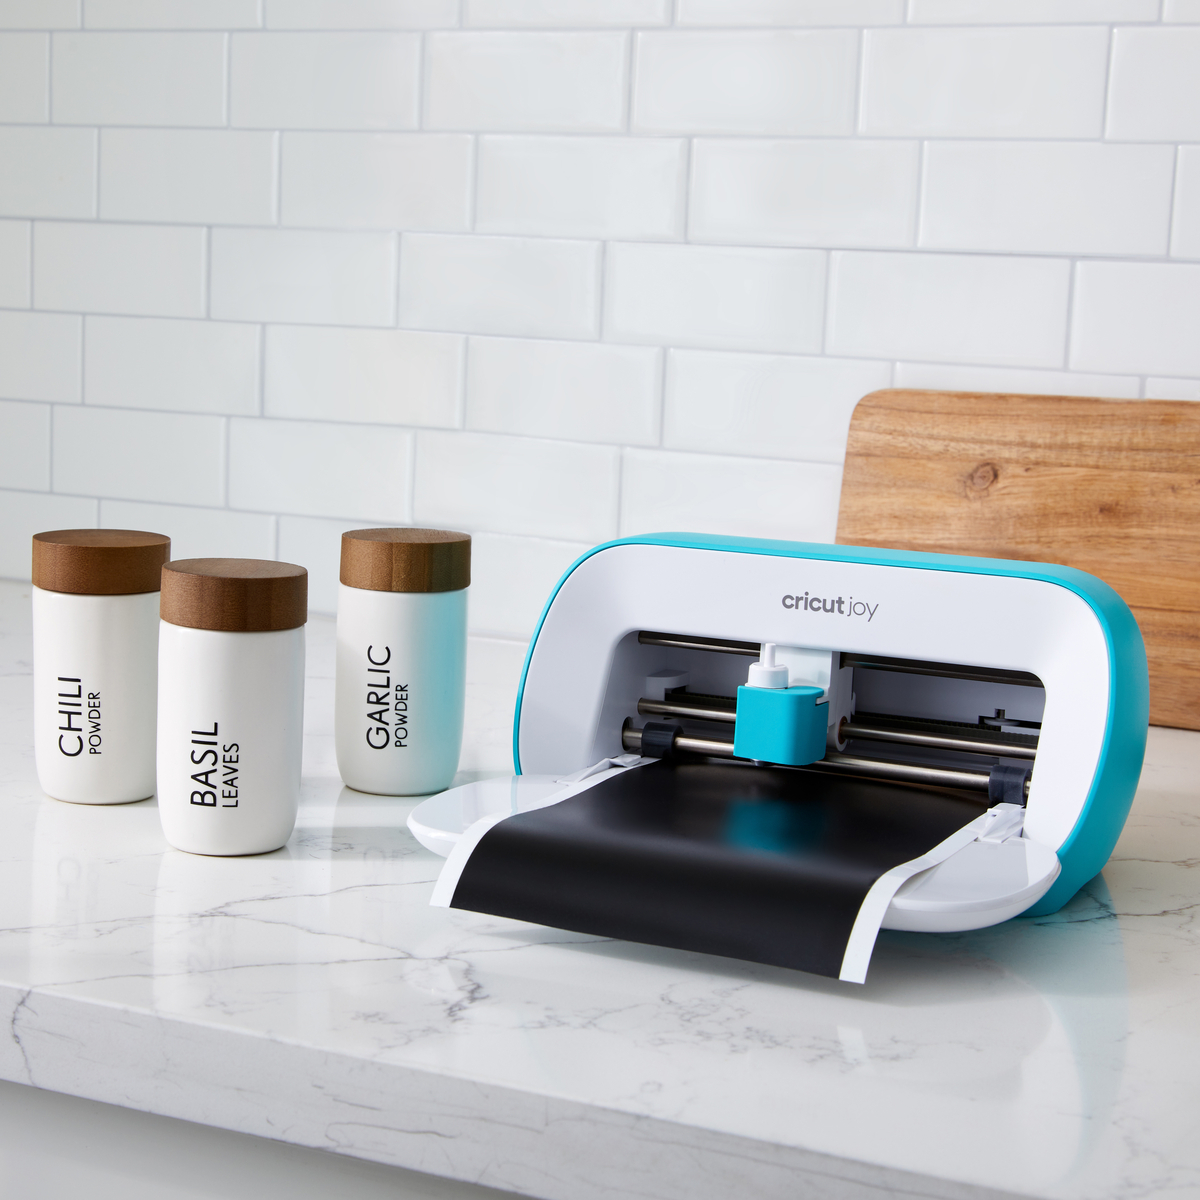 Curious about Cricut Joy? Discover the complete starter kit! 